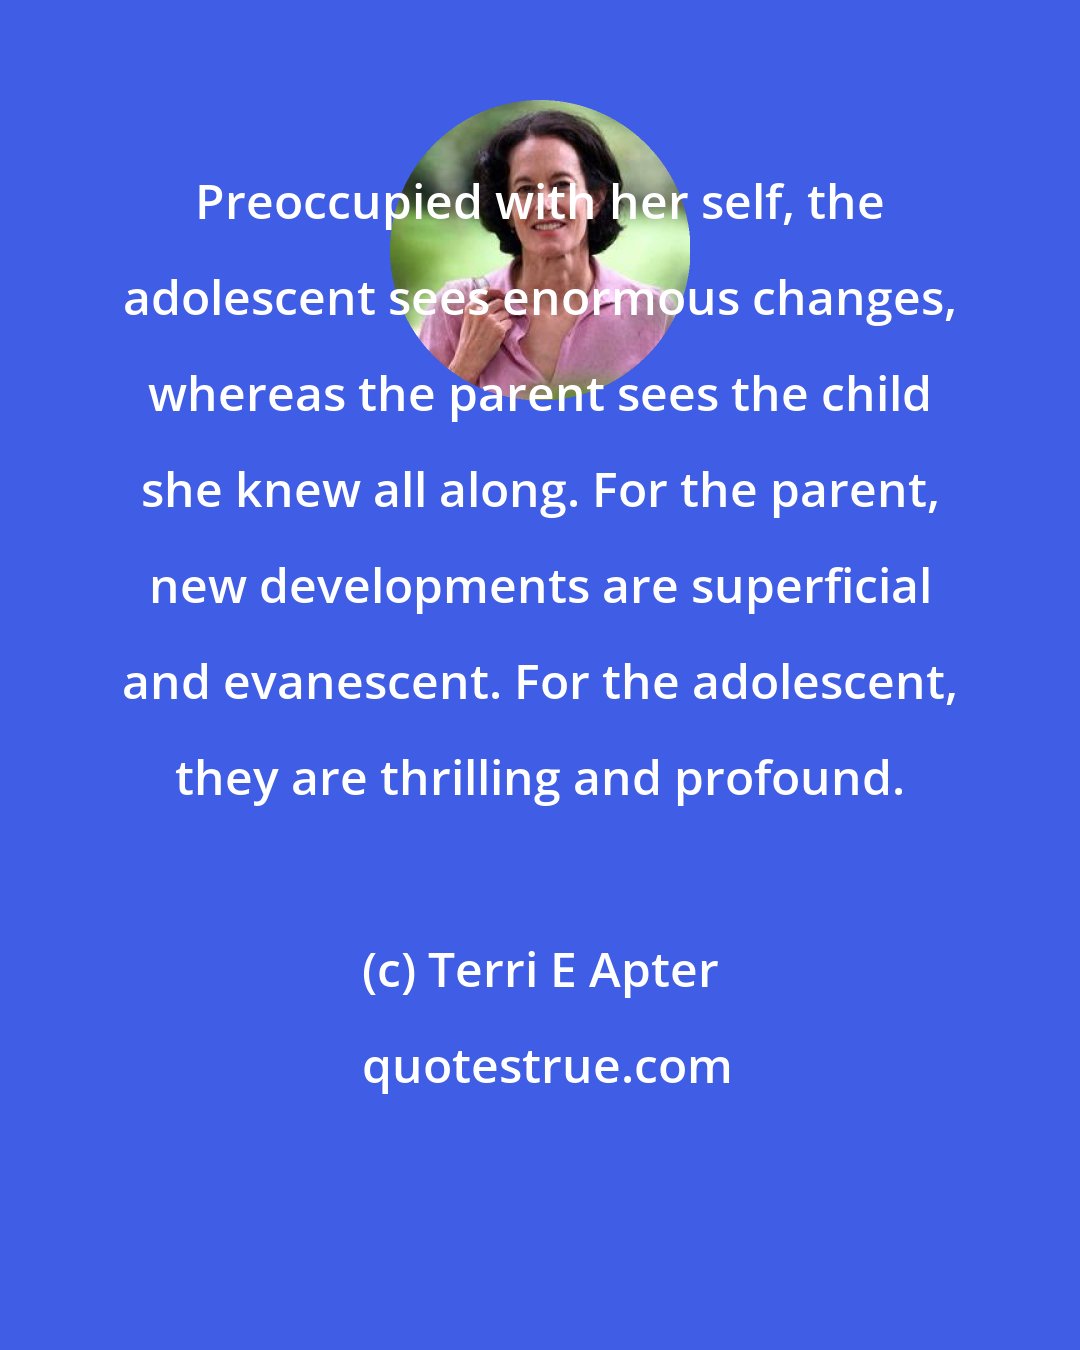 Terri E Apter: Preoccupied with her self, the adolescent sees enormous changes, whereas the parent sees the child she knew all along. For the parent, new developments are superficial and evanescent. For the adolescent, they are thrilling and profound.